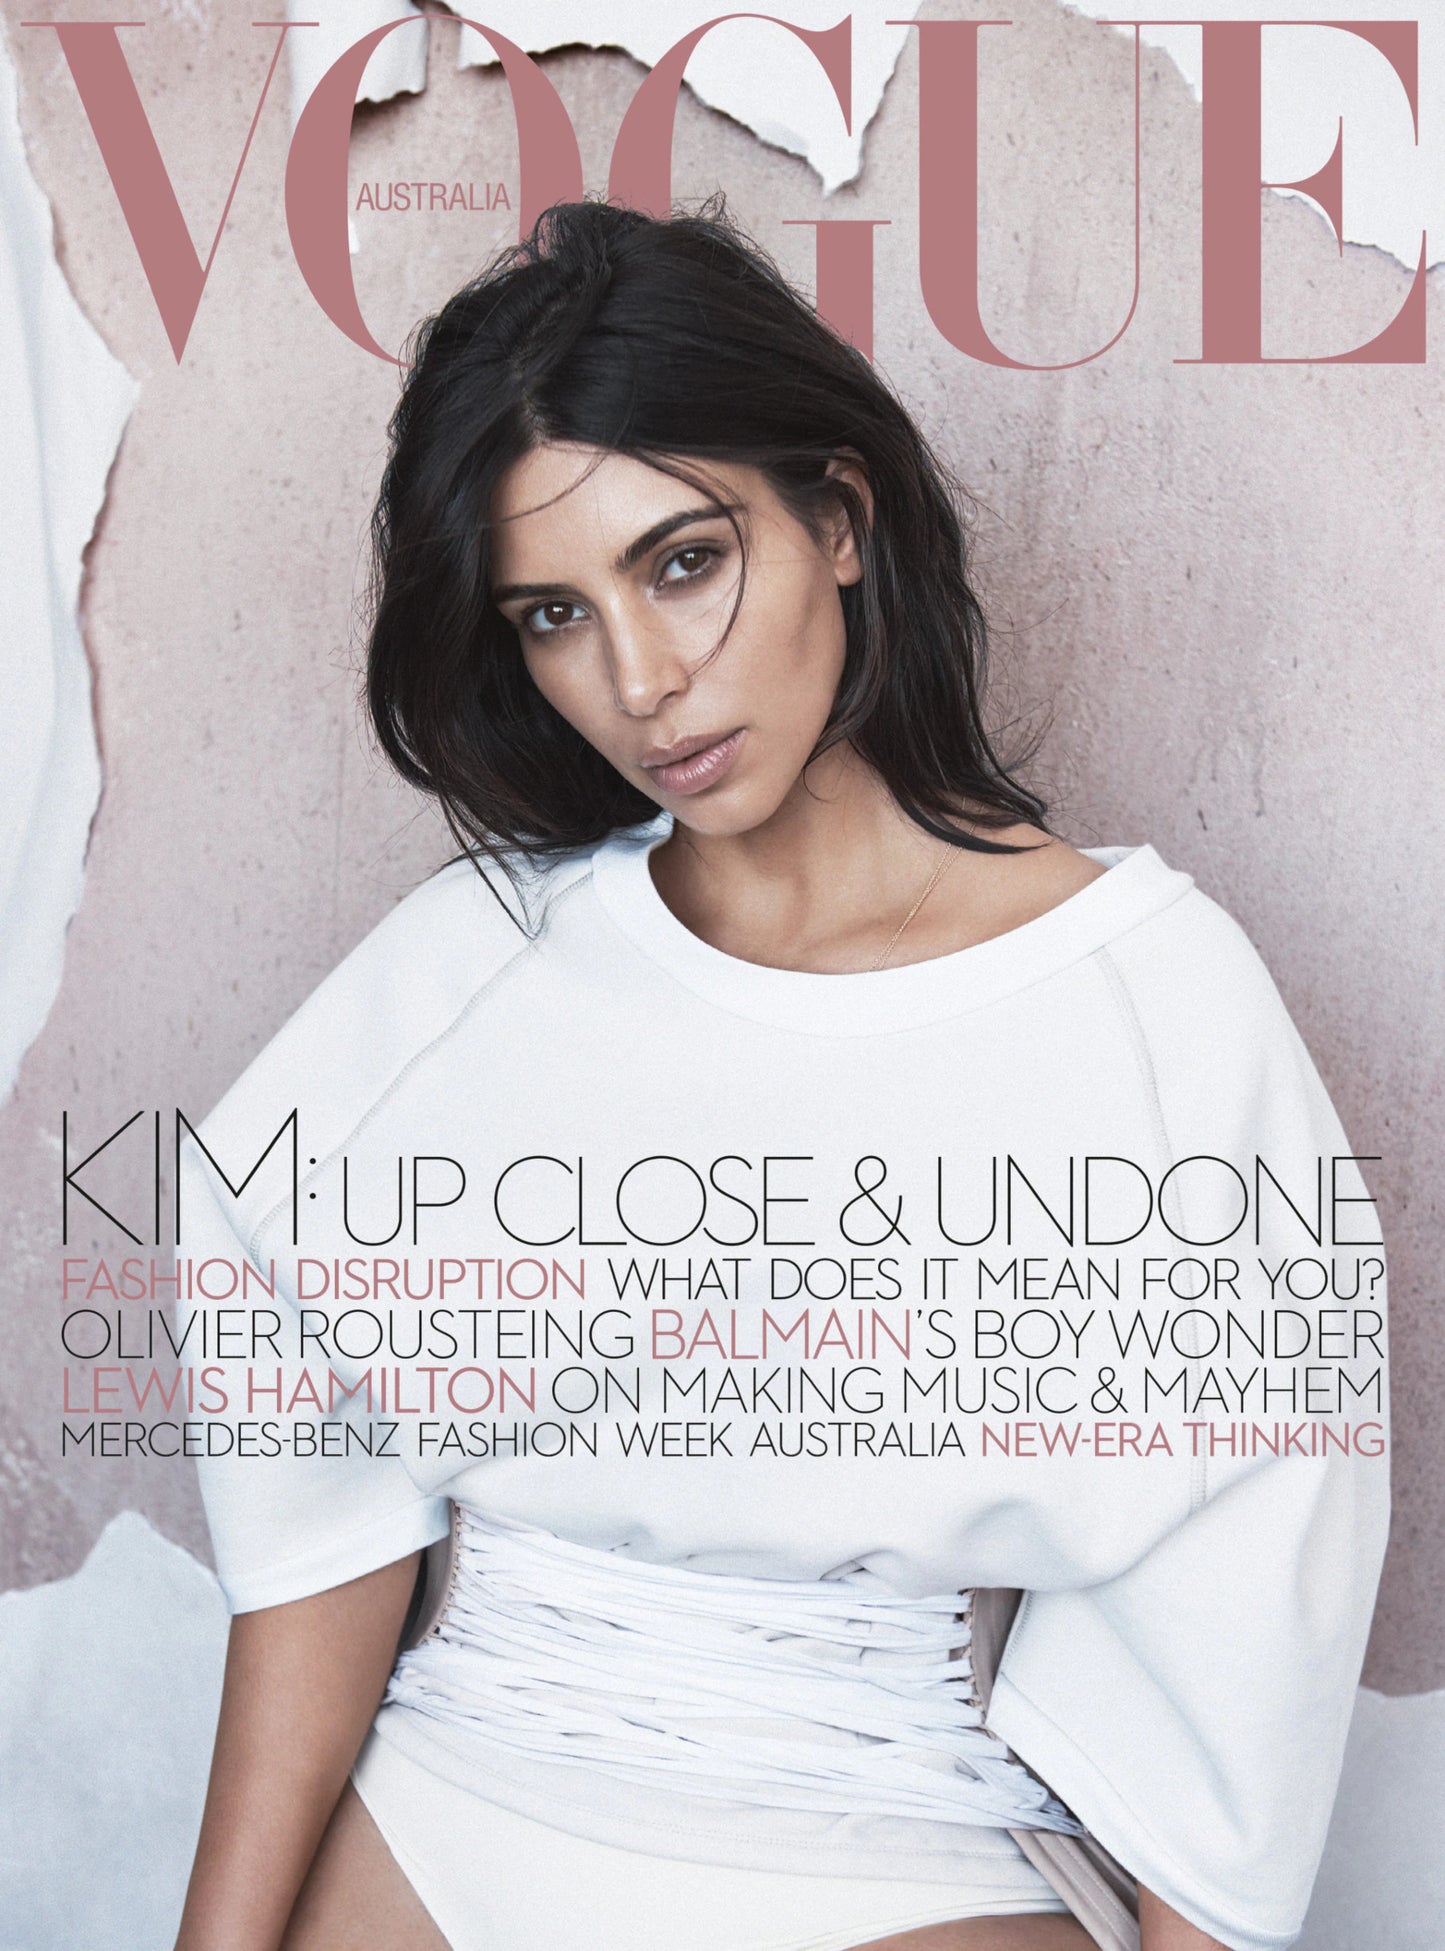 Kim Kardashian wearing a commissioned Deborah Brand corset on the cover of Vogue Australia in 2016